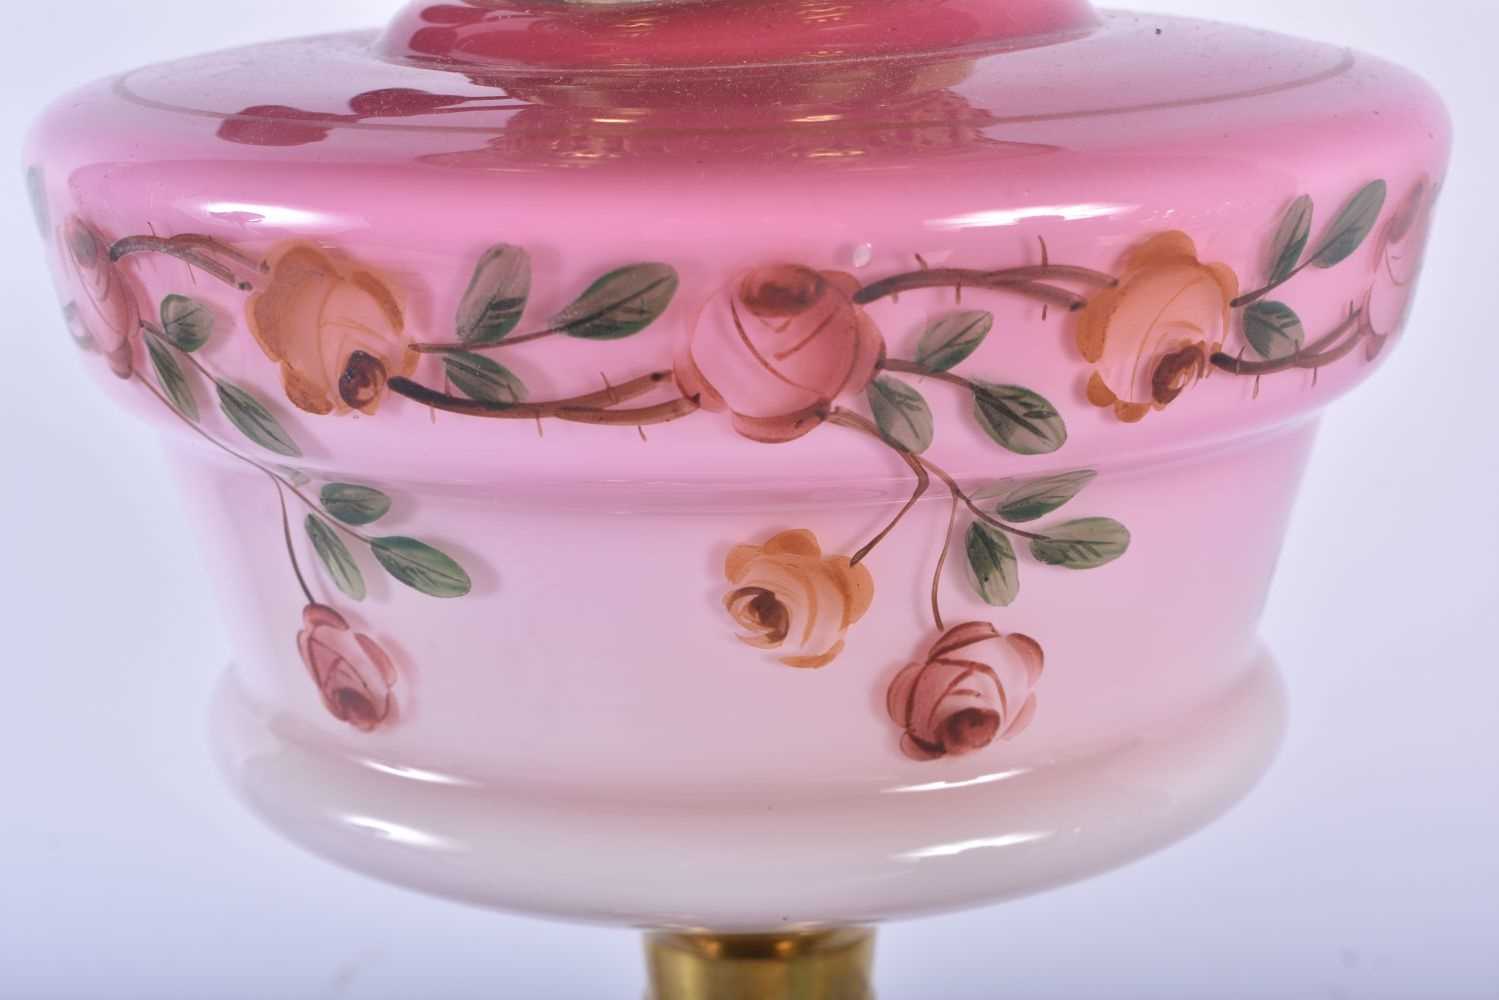 A LARGE ANTIQUE BRASS AND PINK GLASS OIL LAMP. 60 cm high. - Image 4 of 5